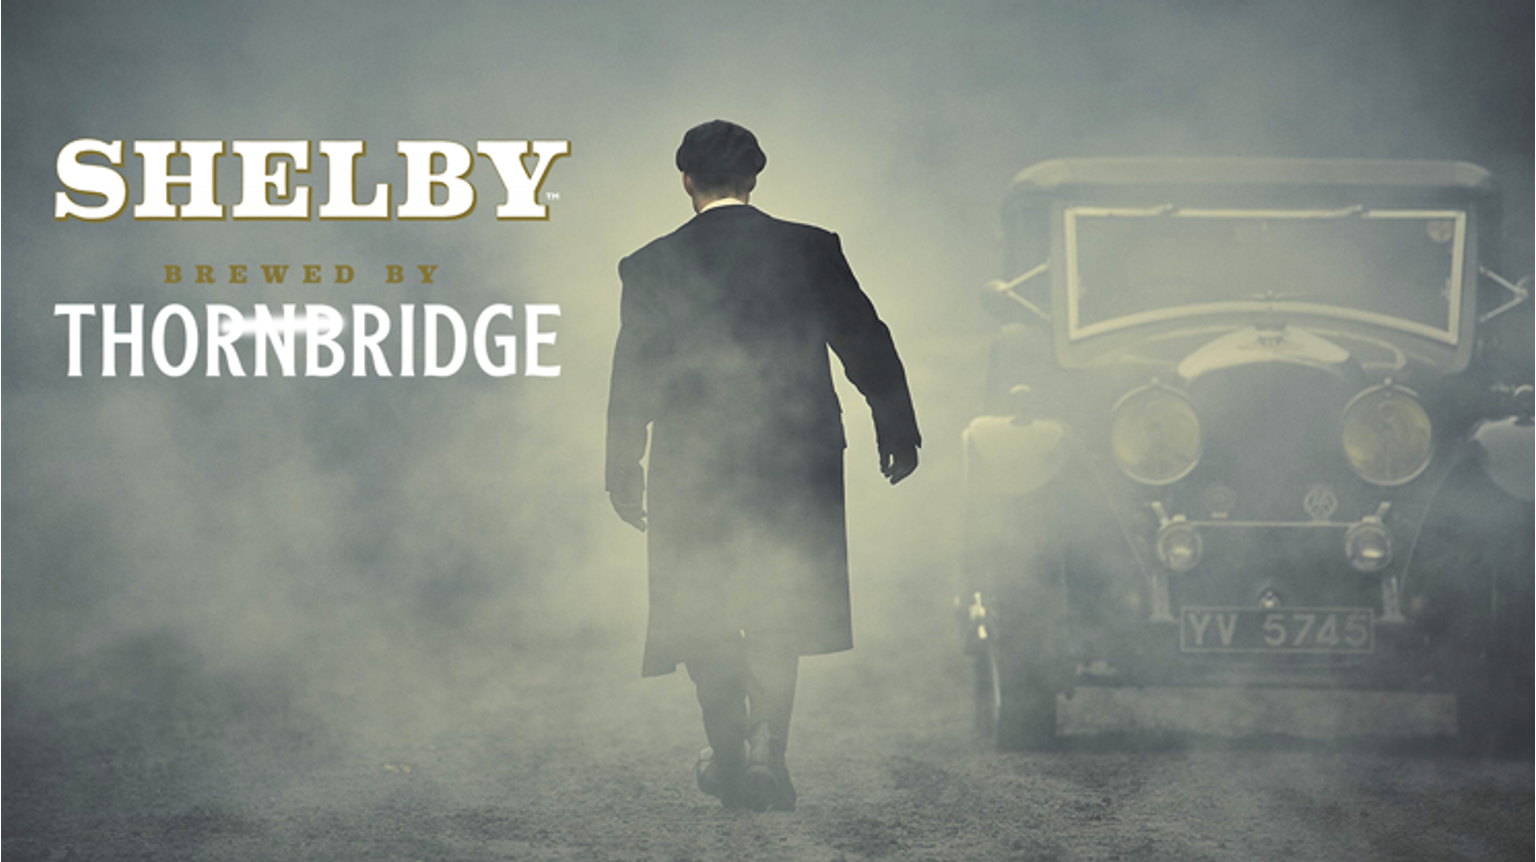 thumbnail for blog article named: NEUES BIER: Shelby, im Auftrag der Peaky Blinders